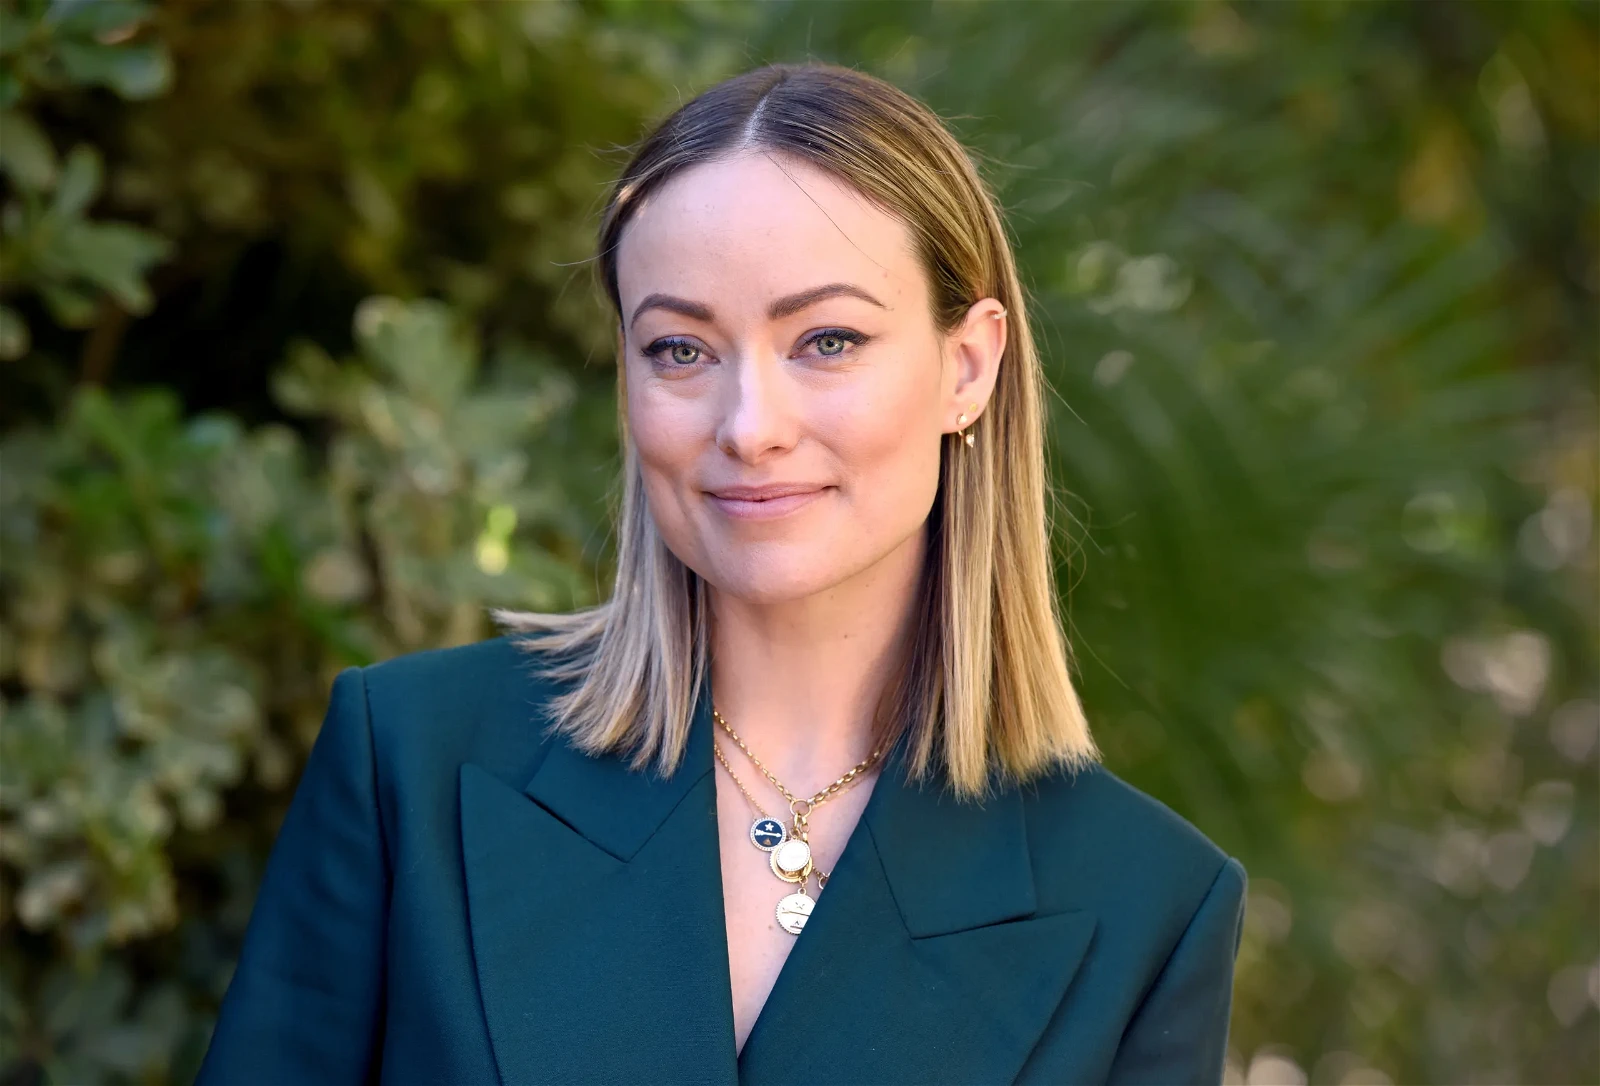 Olivia Wilde says she's envious male colleagues get gentler press coverage